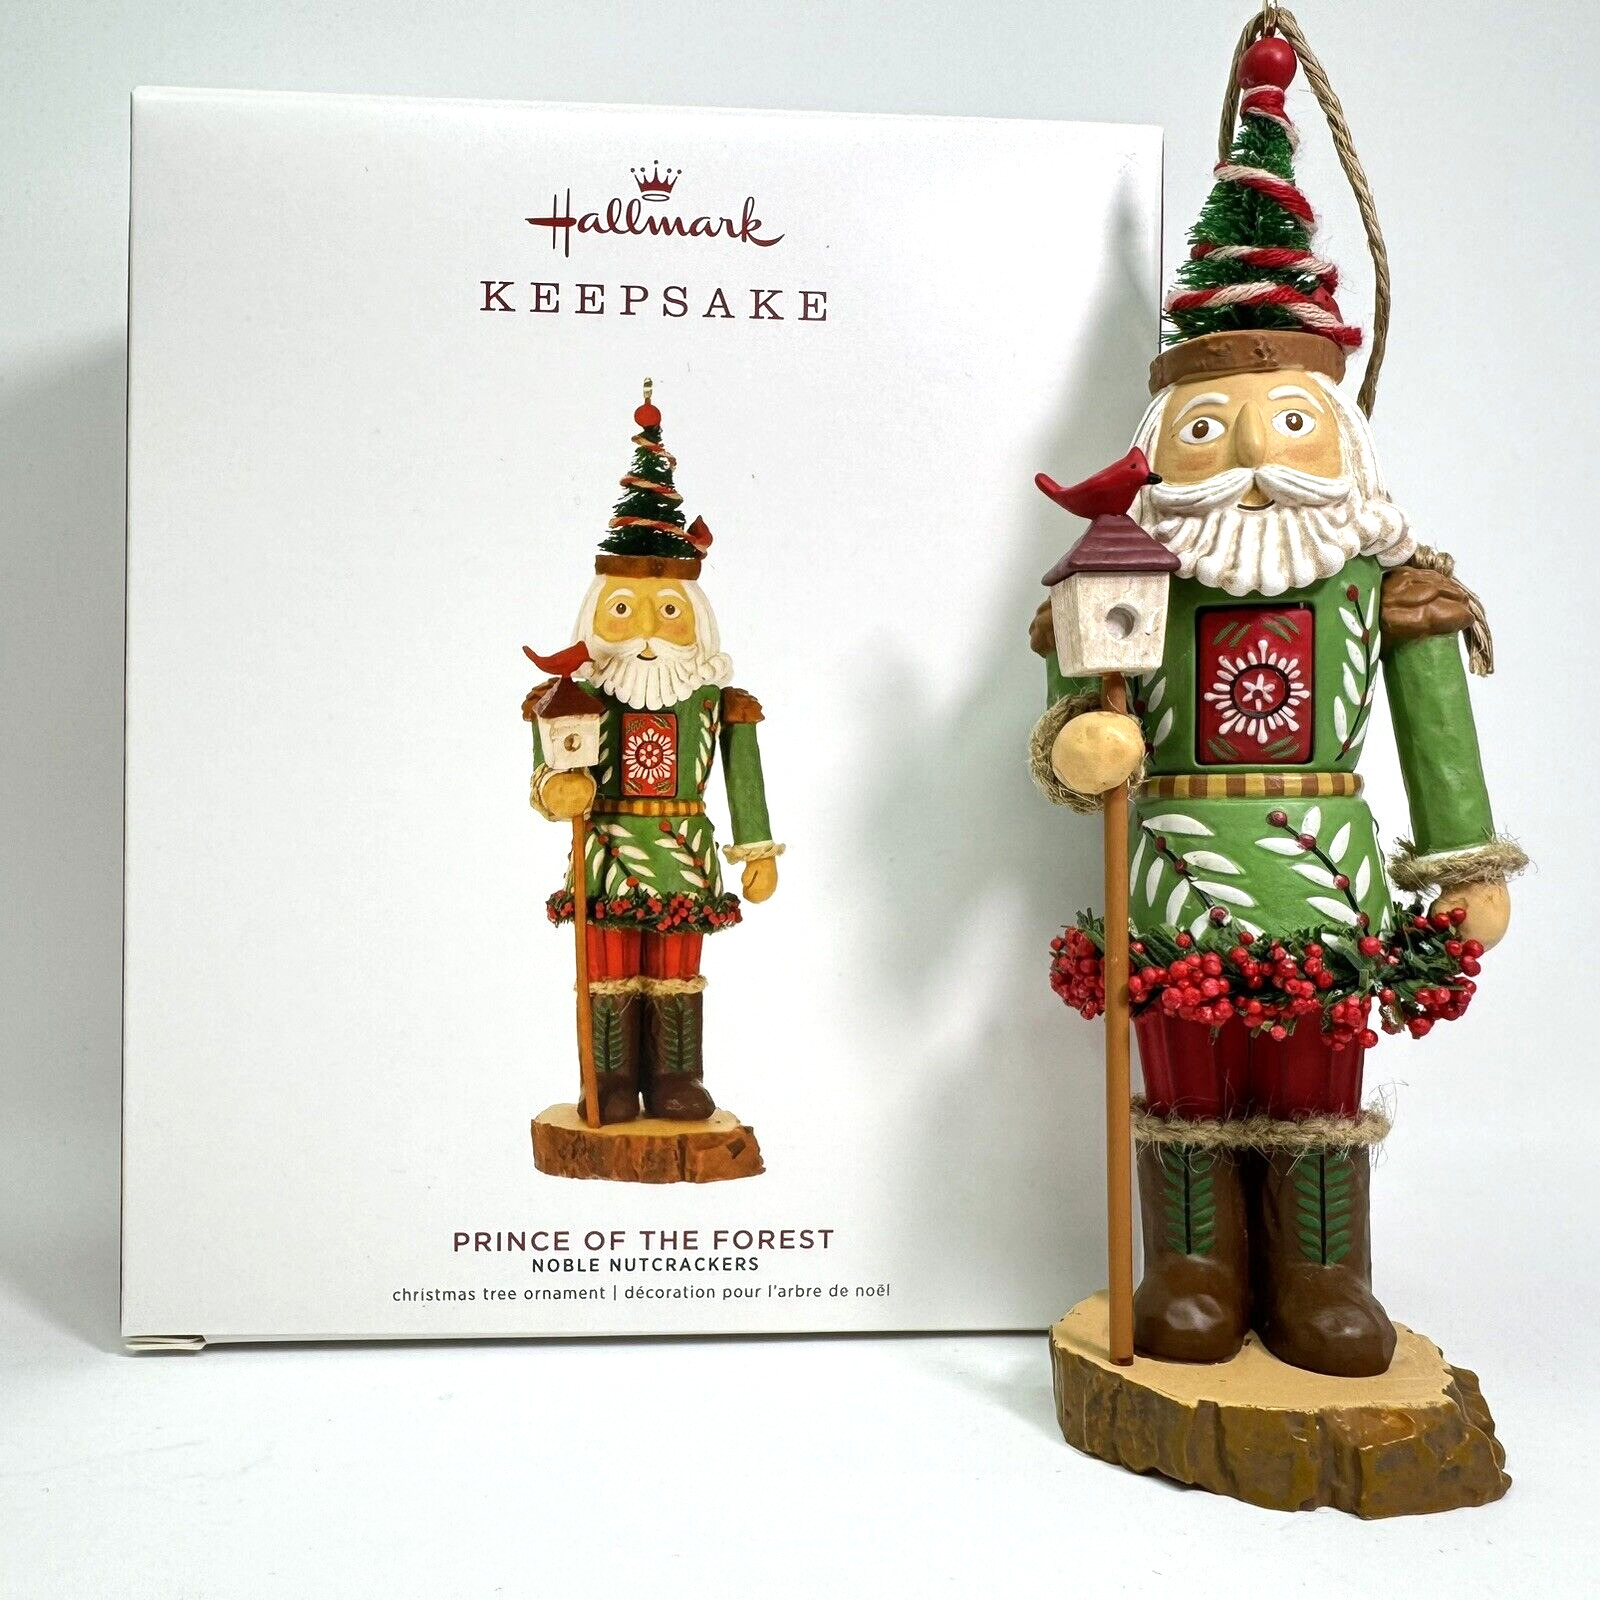 2019 Hallmark Keepsake - PRINCE OF THE FOREST - #1 in NOBLE NUTCRACKERS Series